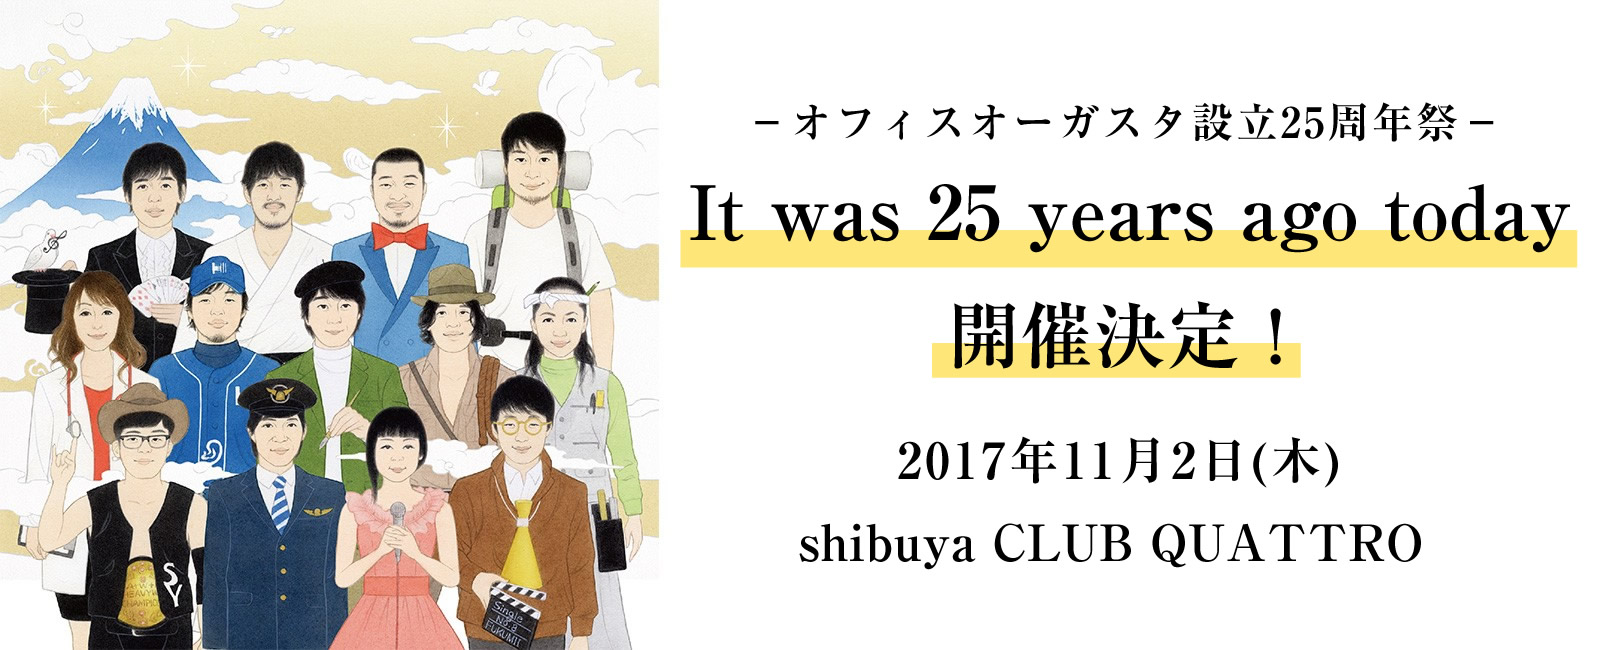 It was 25 years ago today
開催決定！